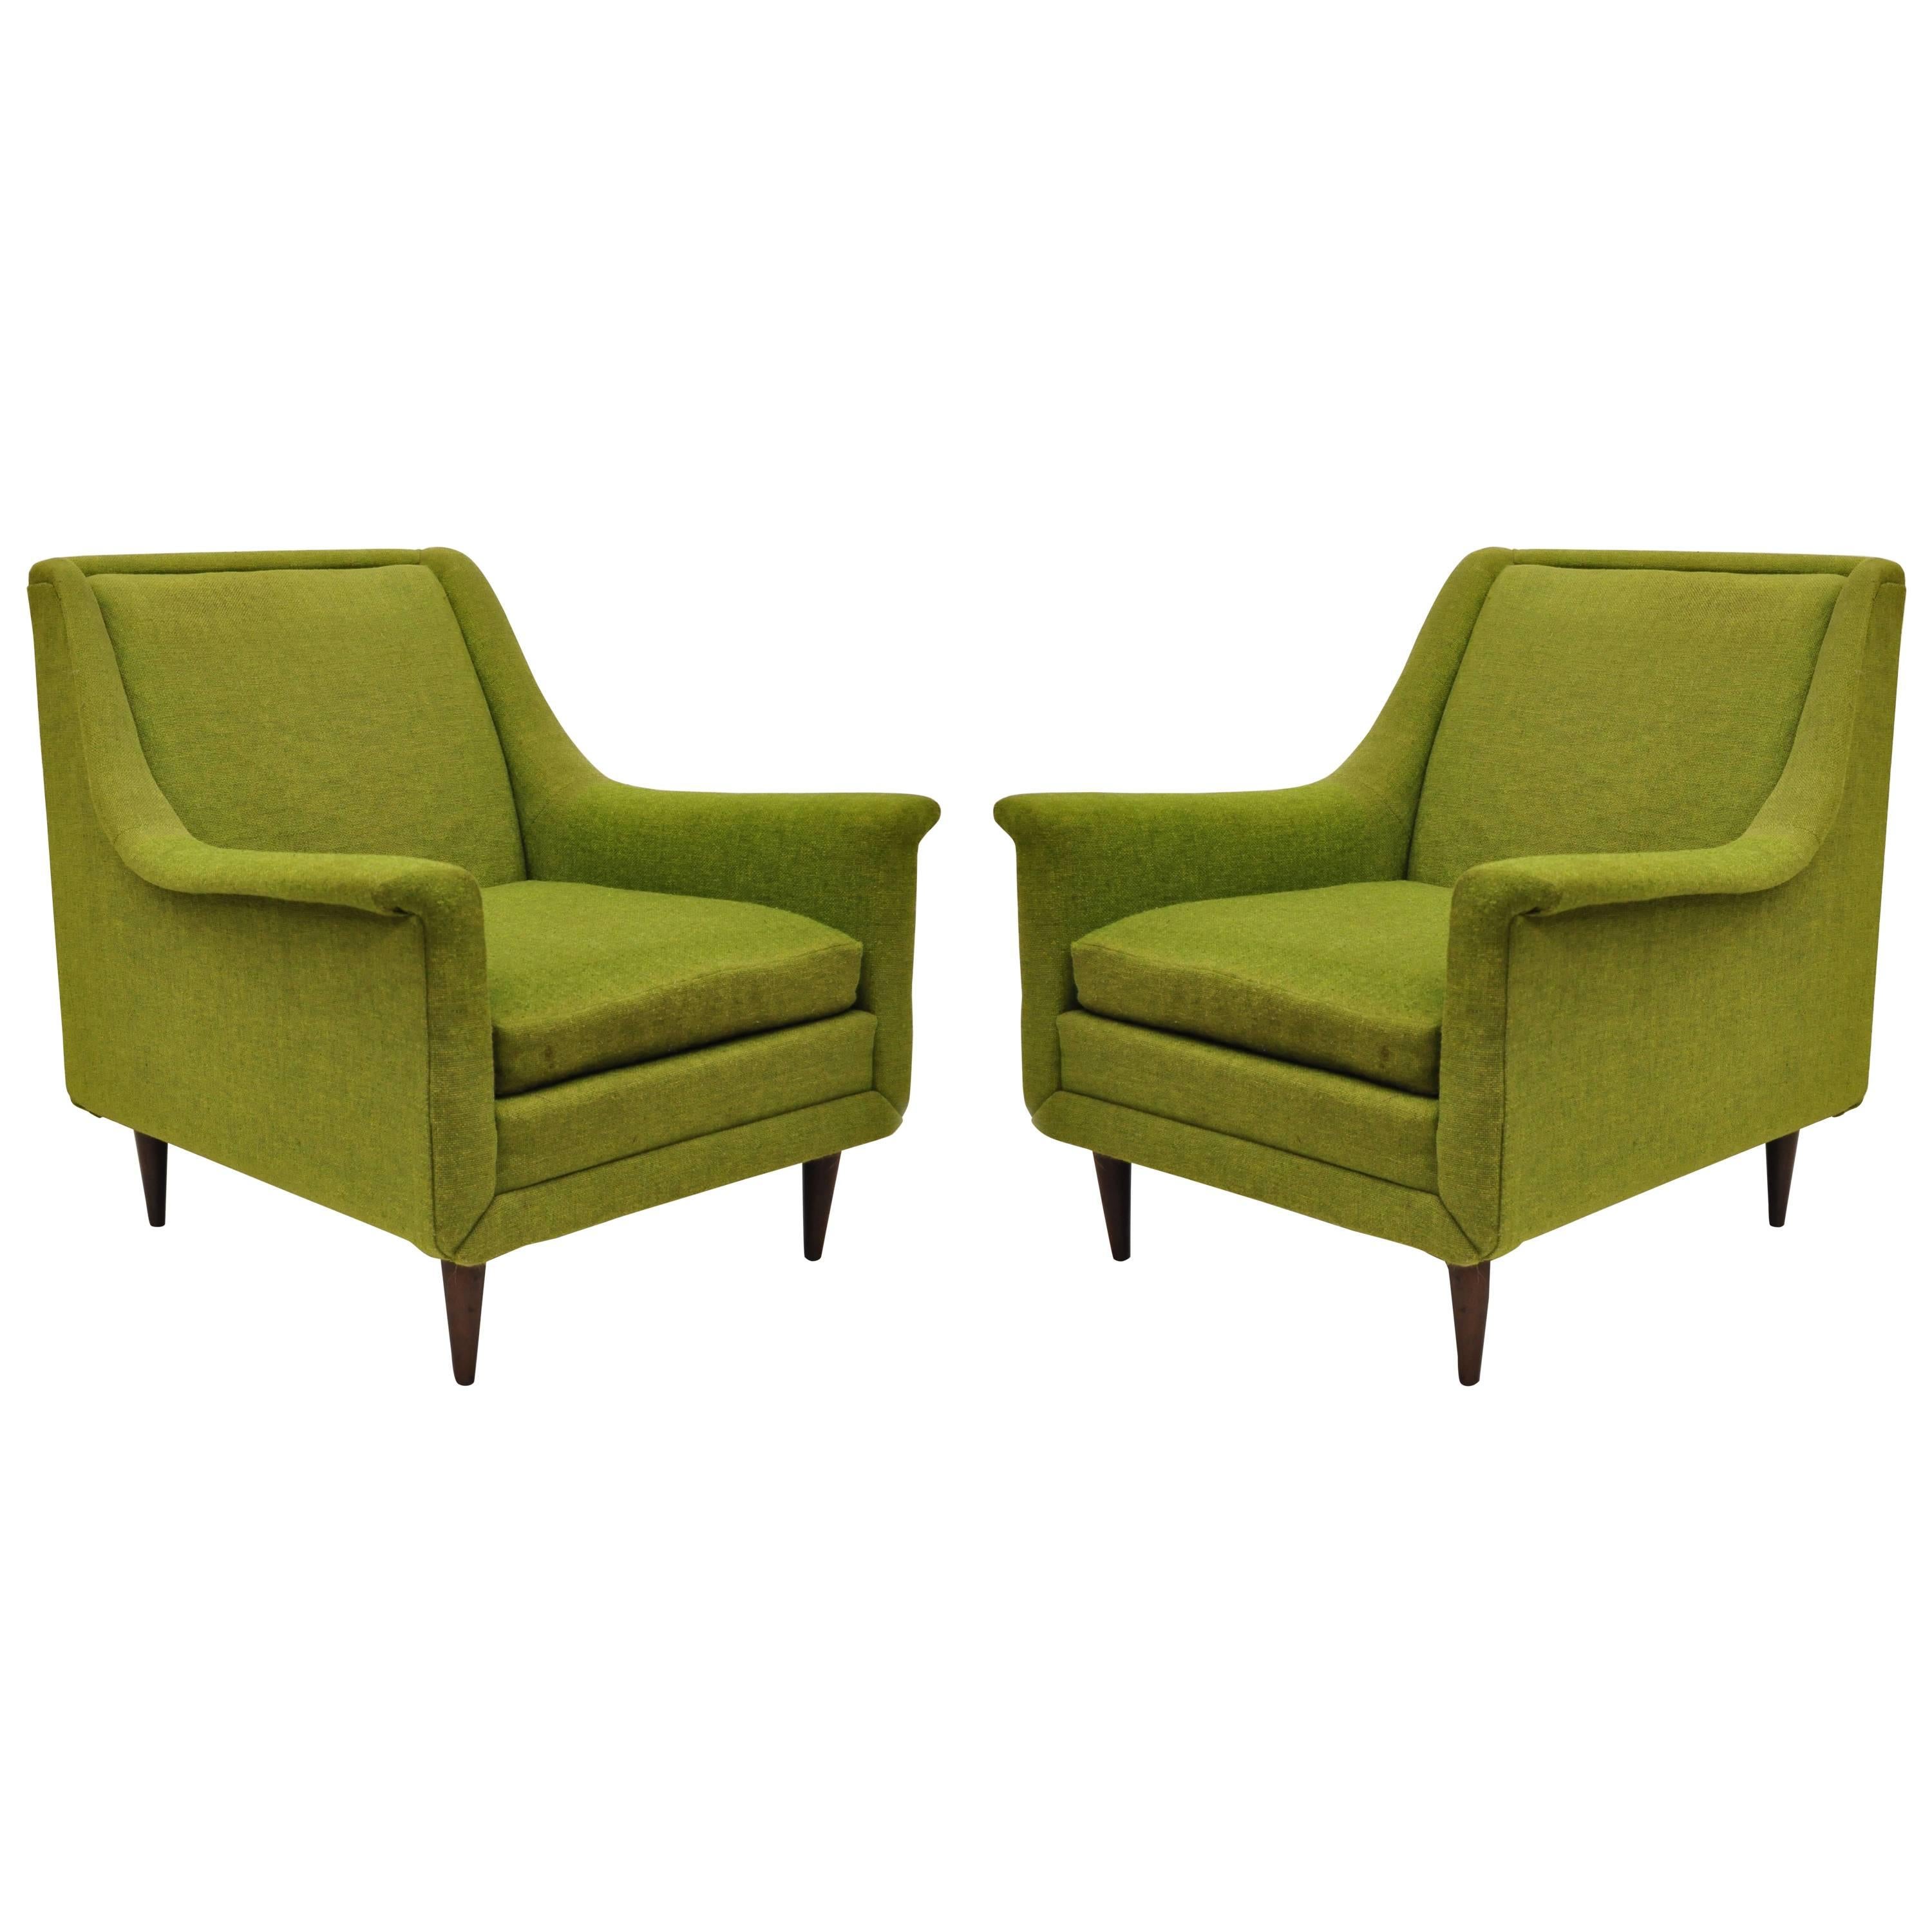 Pair of Kroehler Mid-Century Modern Sculptural Club Lounge Chairs after Pearsall